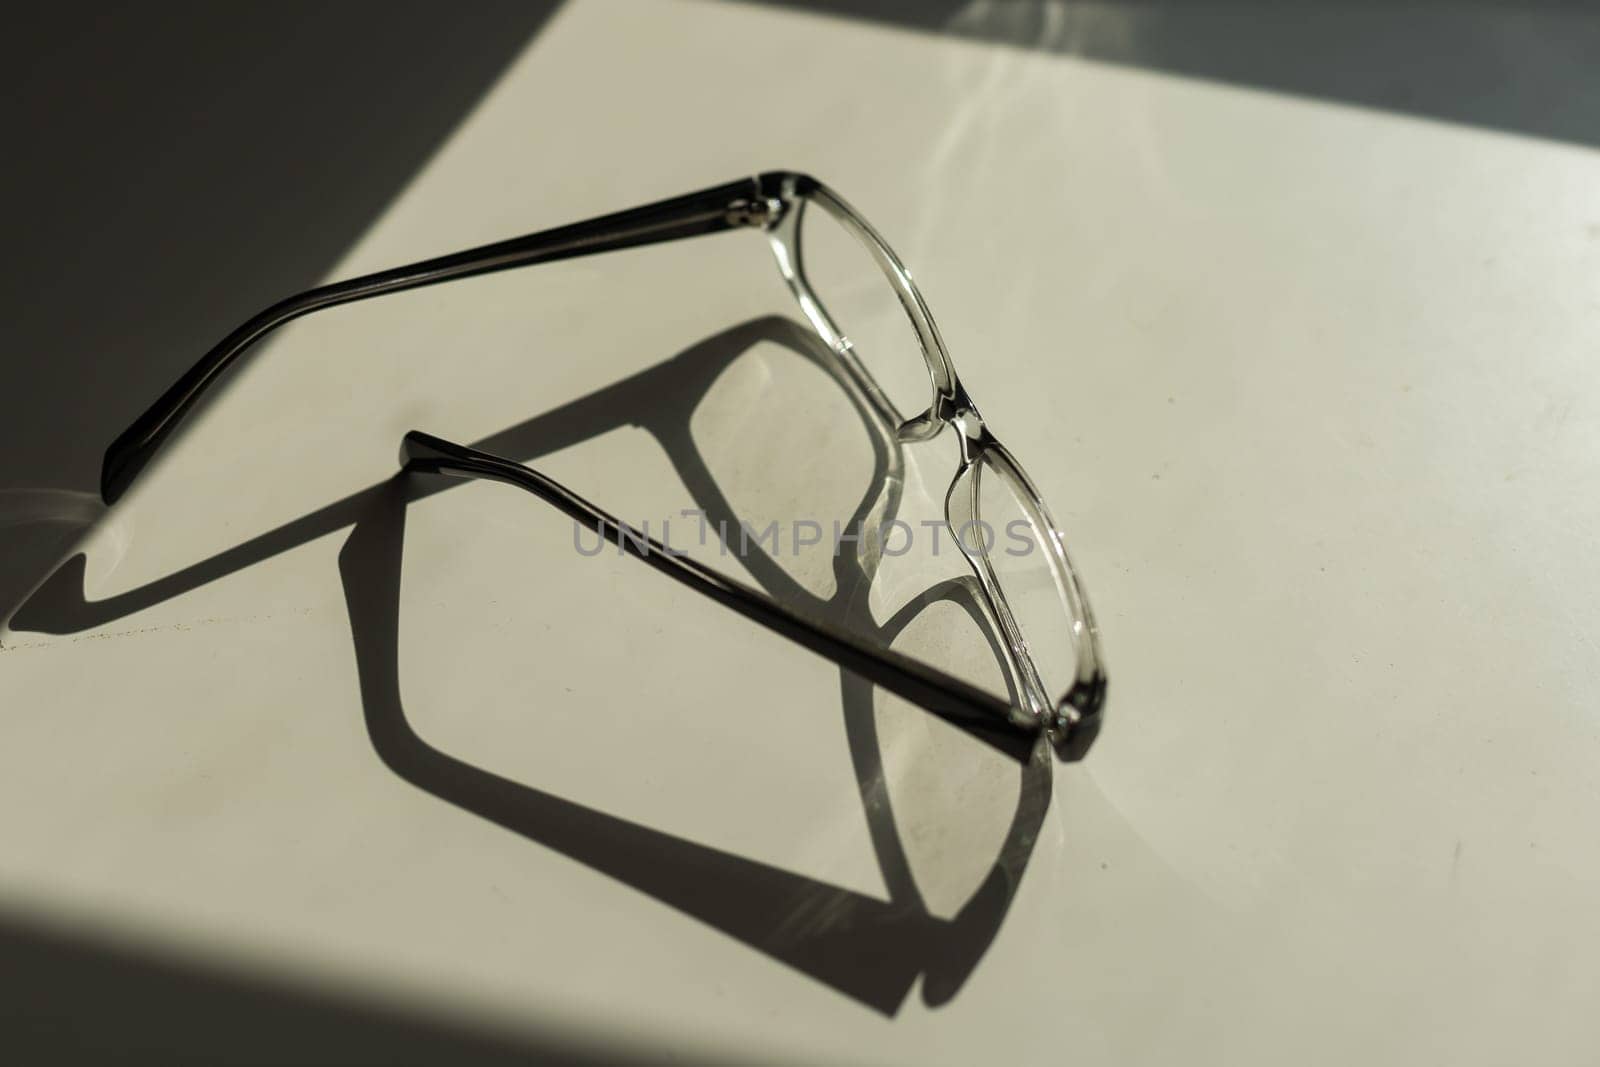 Glasses on a white background.